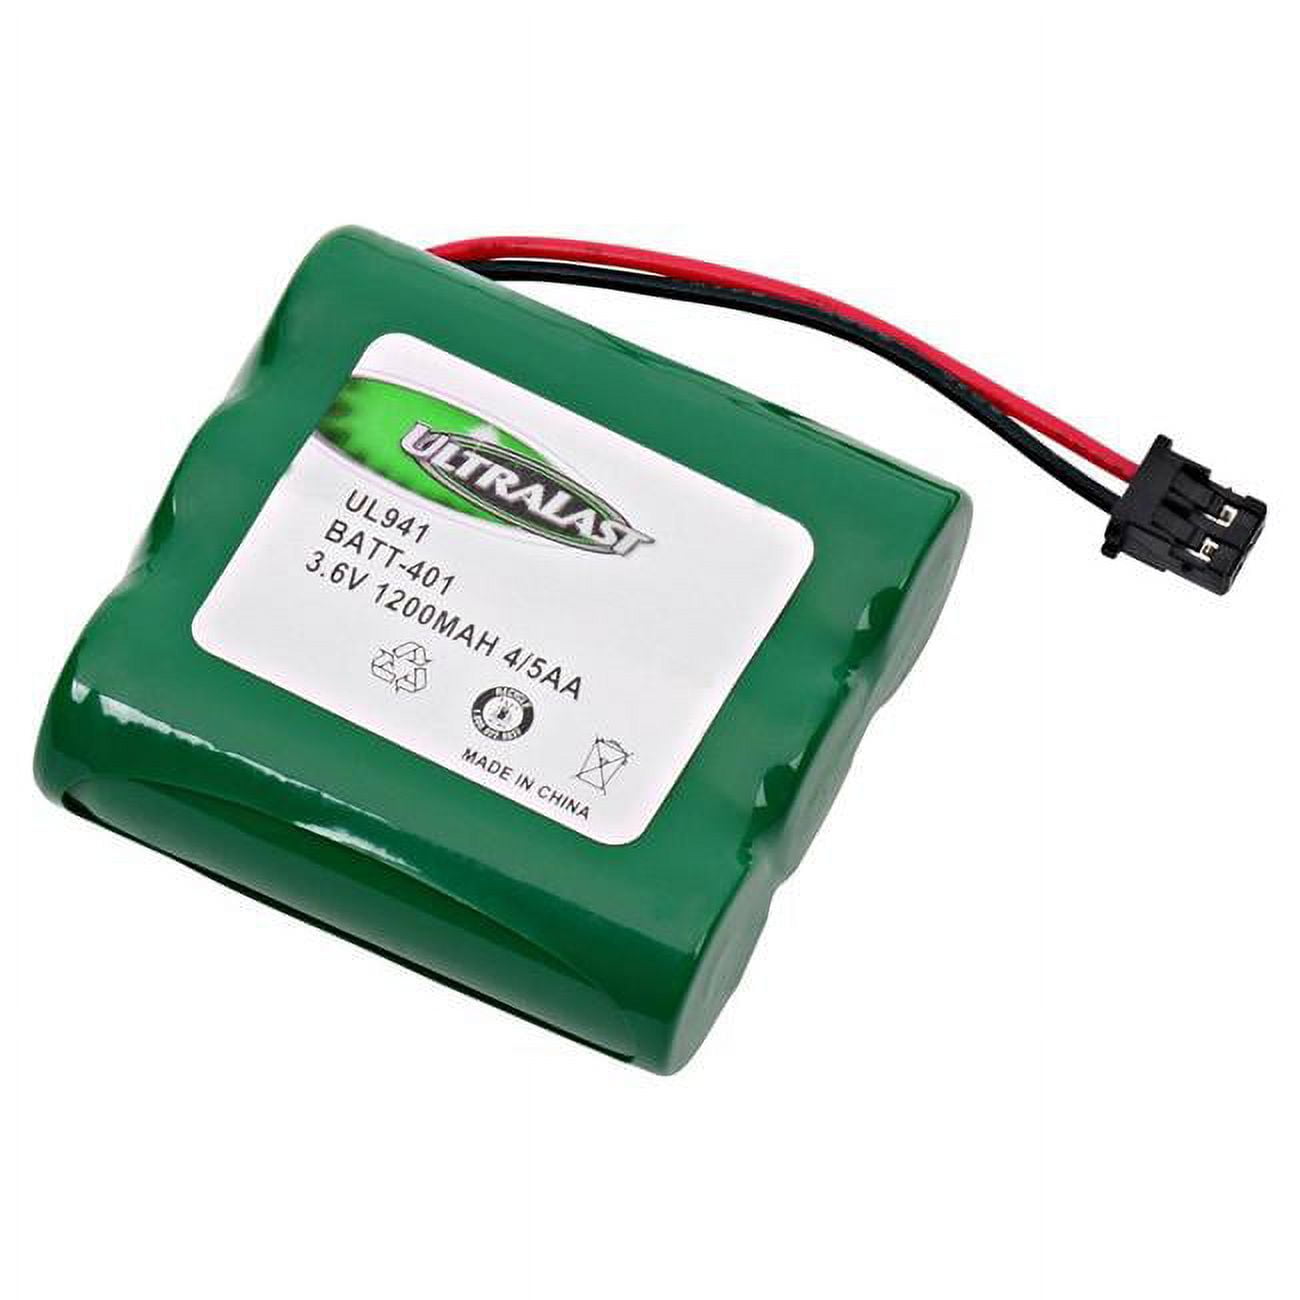 Picture of Ultralast BATT-401 3.6V & 1150 mAh Replacement Nickel Metal Hydride Battery for GE-Sanyo - 49001 Cordless Phone